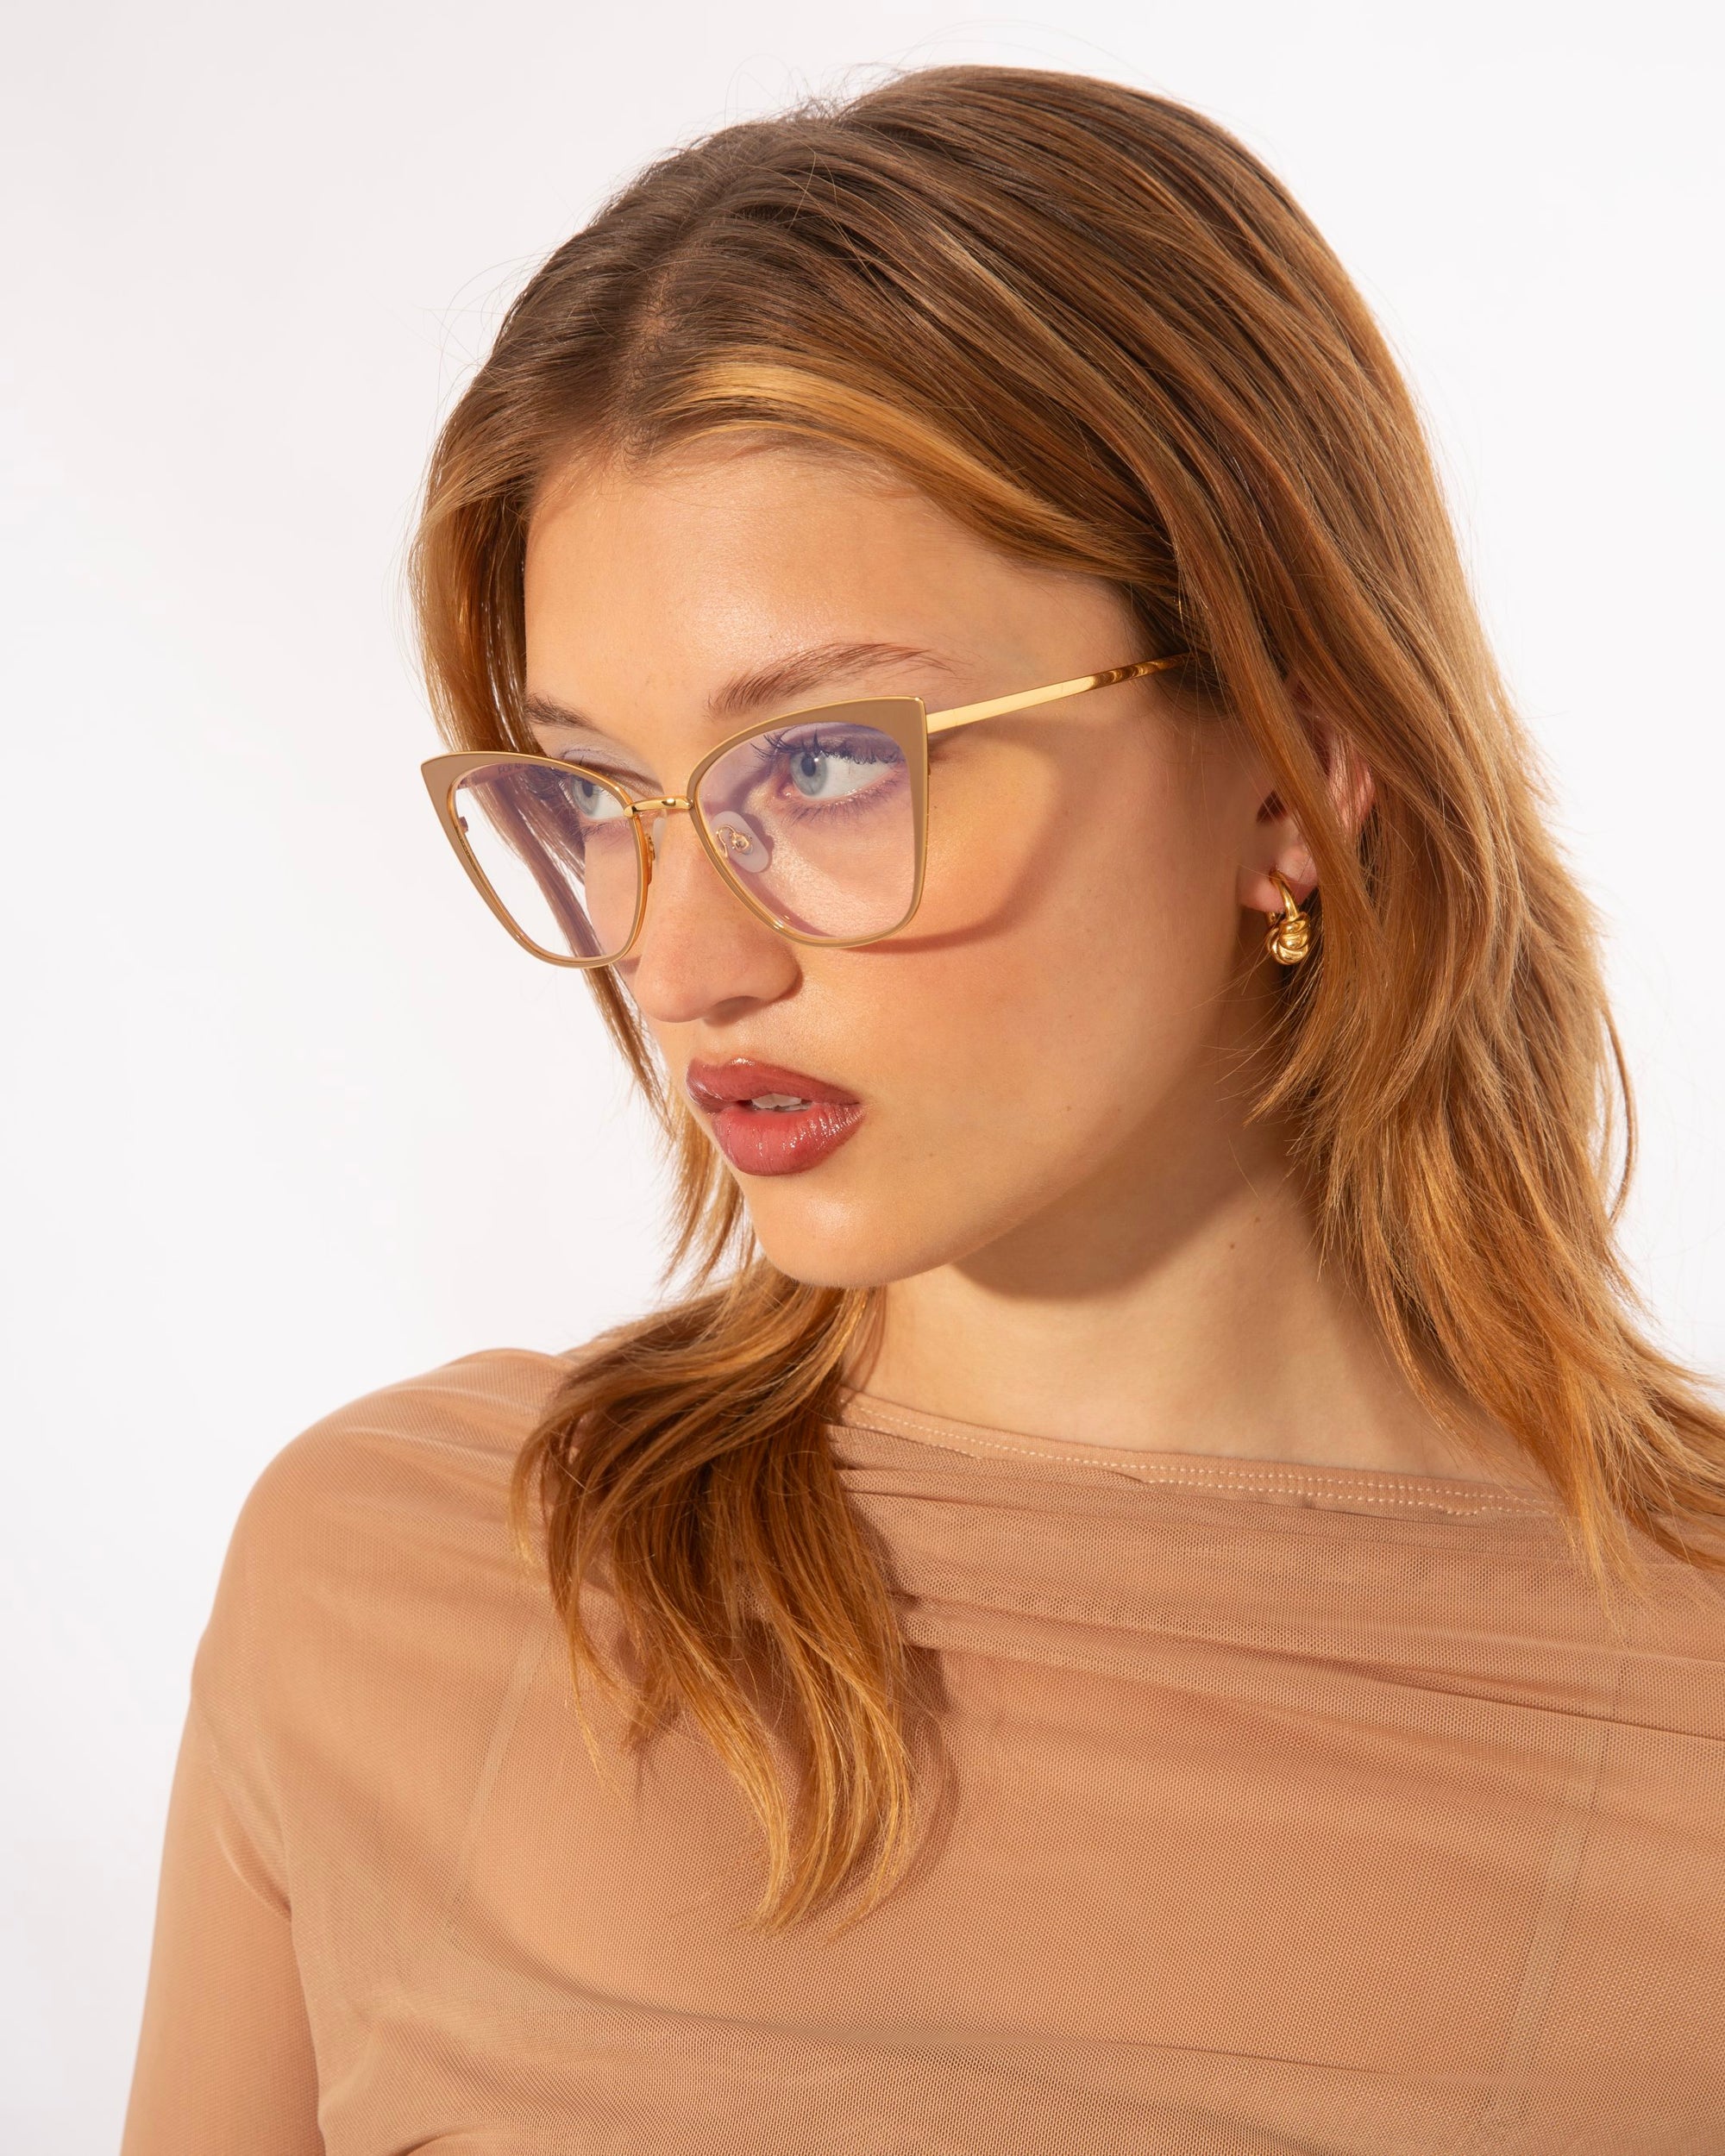 A woman with light brown hair wearing stylish, oversized glasses with a Blue Light Filter and small 14kt gold plated hoop earrings looks slightly to the side. She is dressed in a sheer, beige top. She is wearing Stella Two by For Art's Sake®. The background is plain white, giving a clean and minimalist aesthetic to the image.